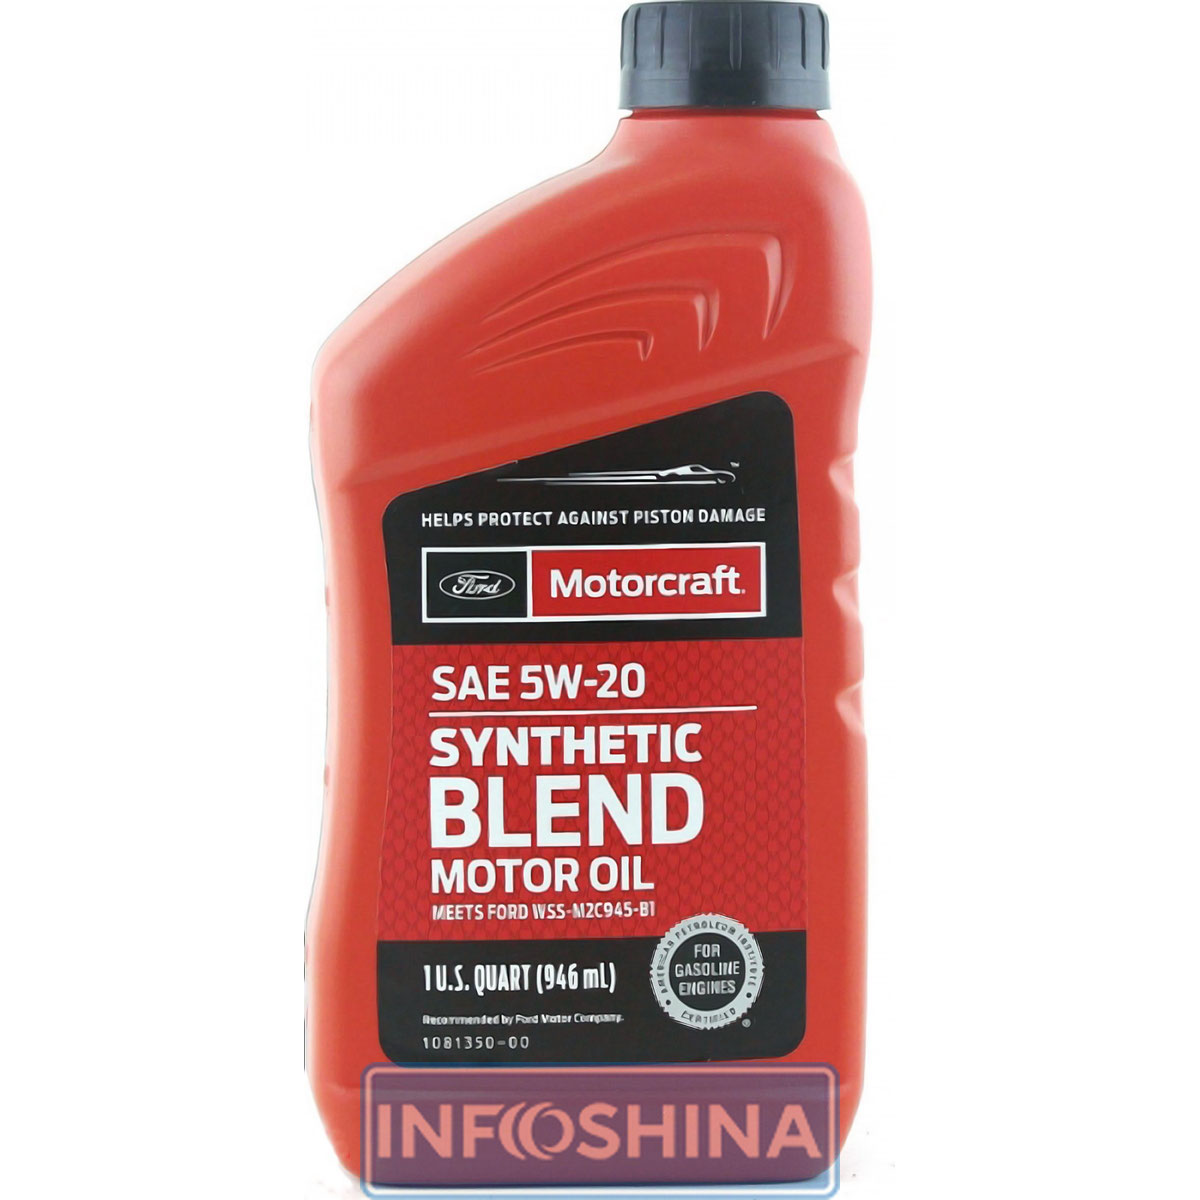 Motorcraft Synthetic Blend Motor Oil SAE 5W-20